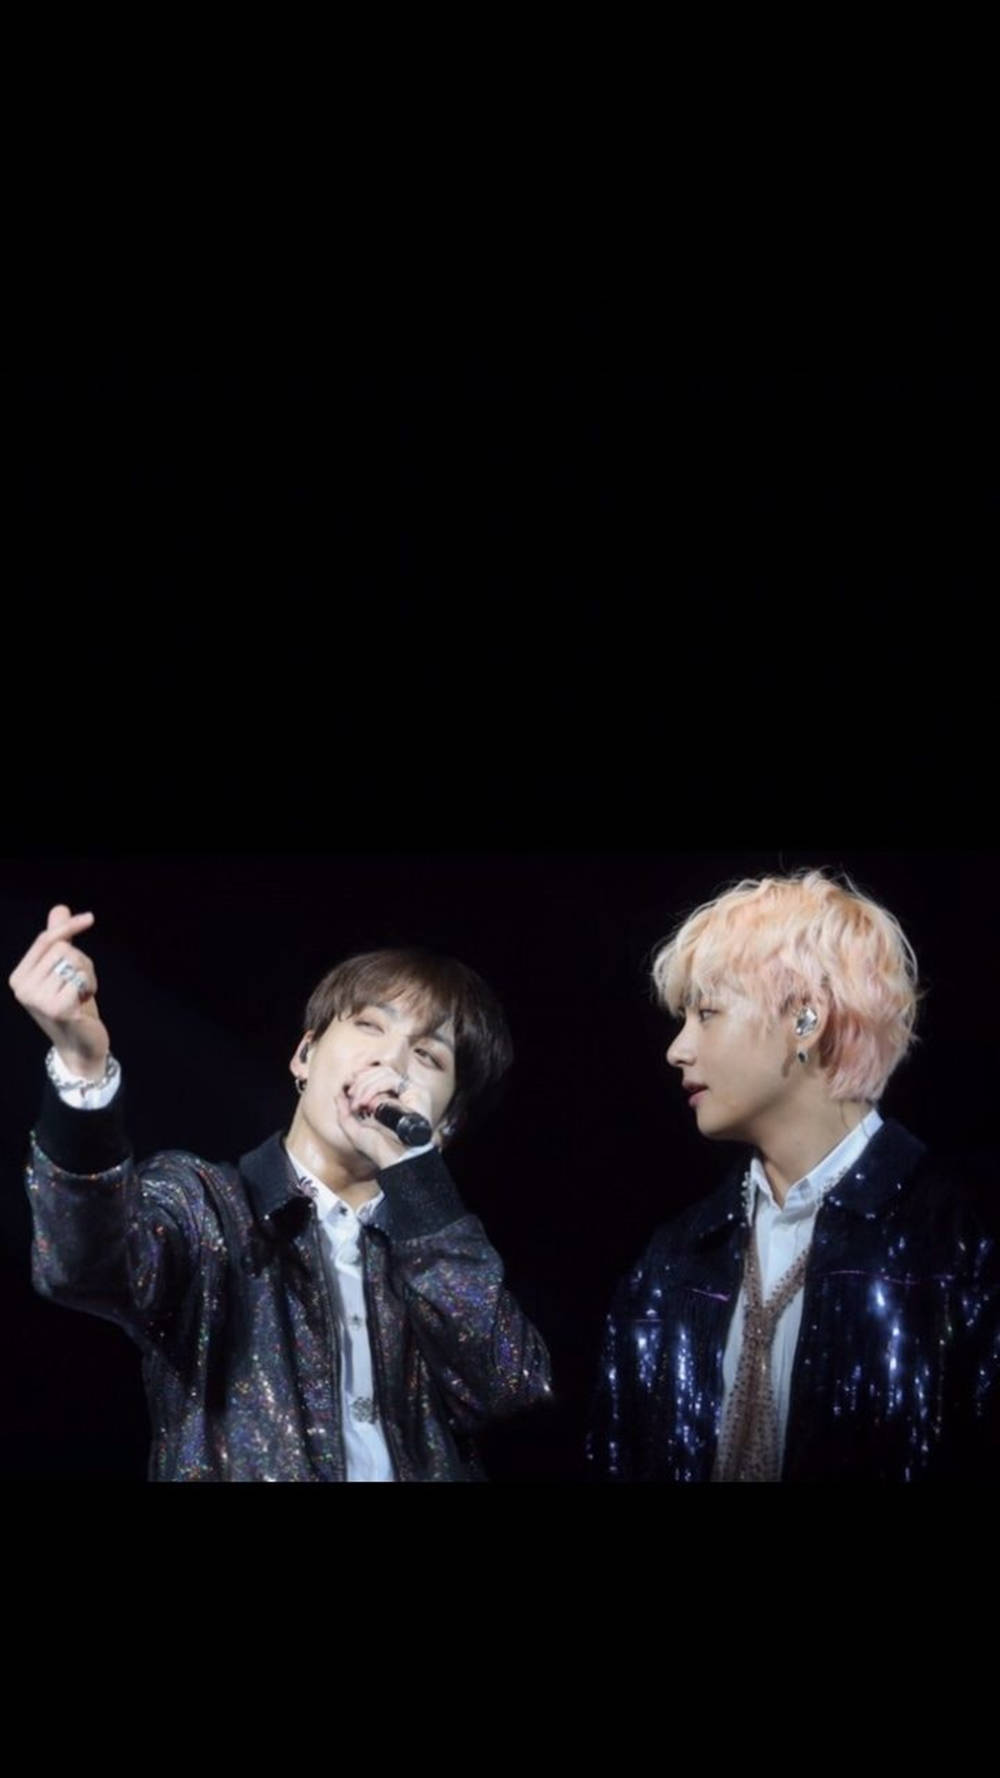 Bts Jk And V Love Yourself Tour Performance Background